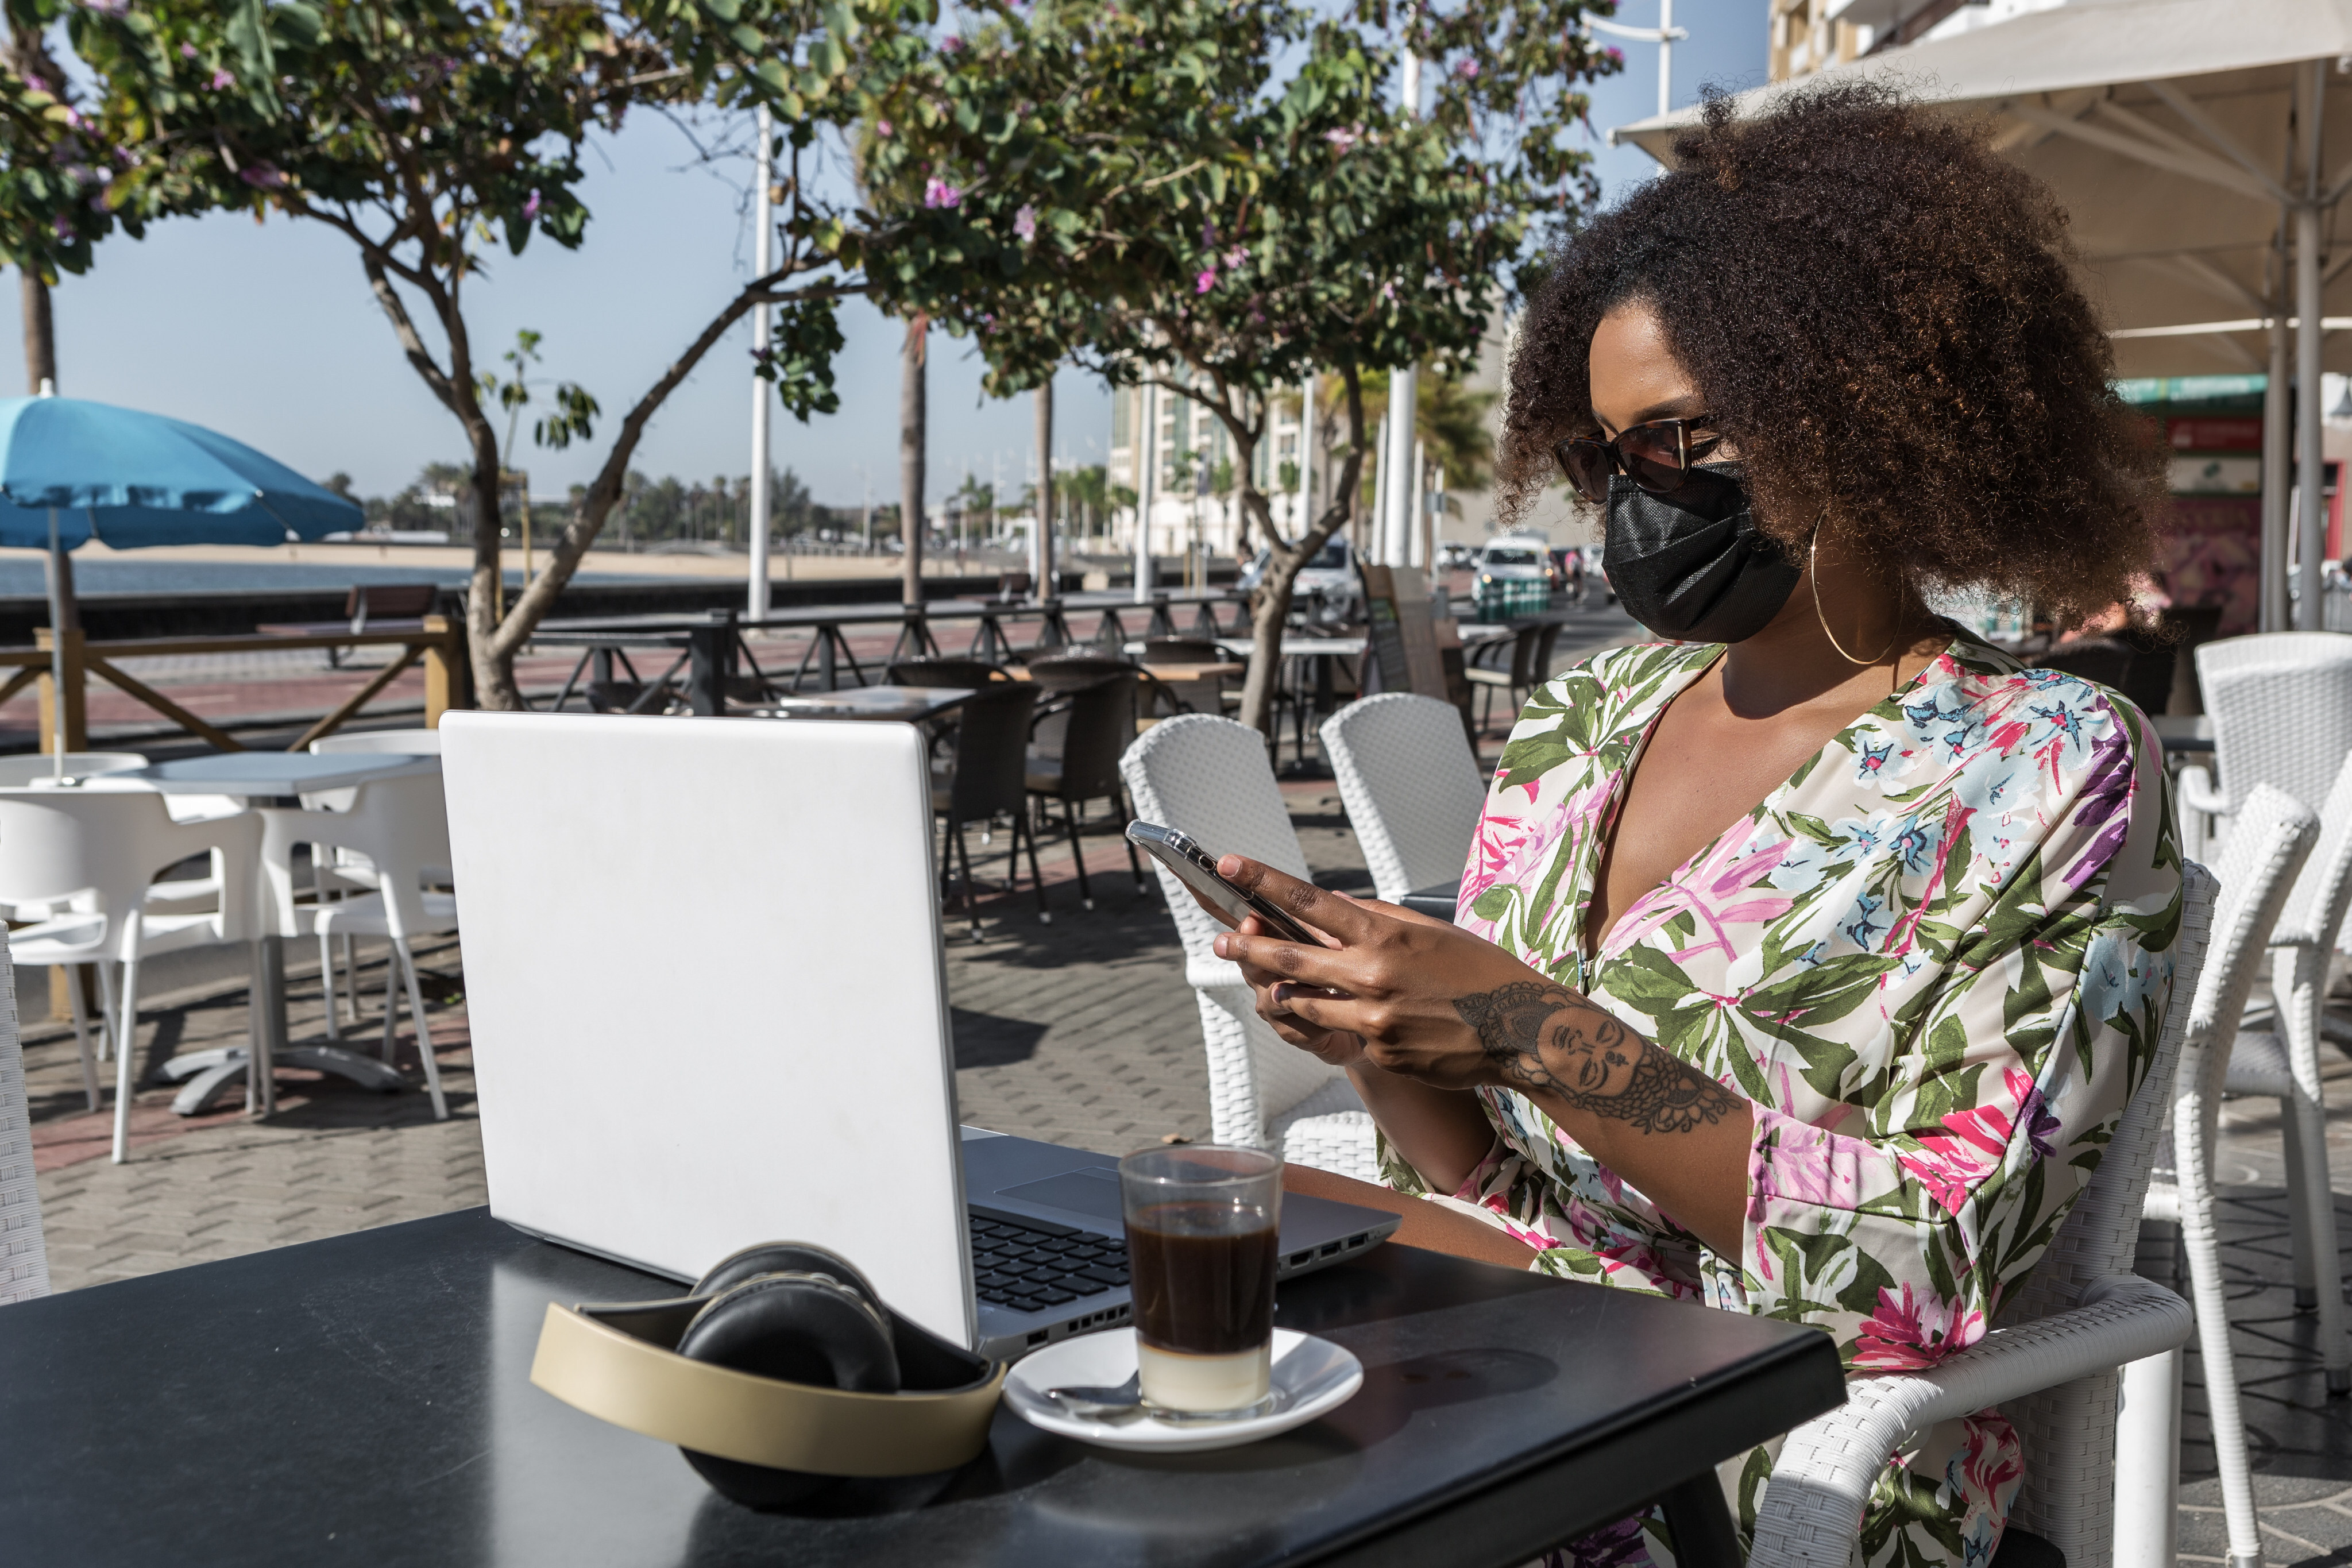 A study of the cities best equipped for digital nomads puts Melbourne top, followed by Dubai, Sydney and Tallinn in Estonia. Remote working is forecast to rise as travel curbs ease with the worst of the Covid-19 pandemic over. Photo: Getty Images